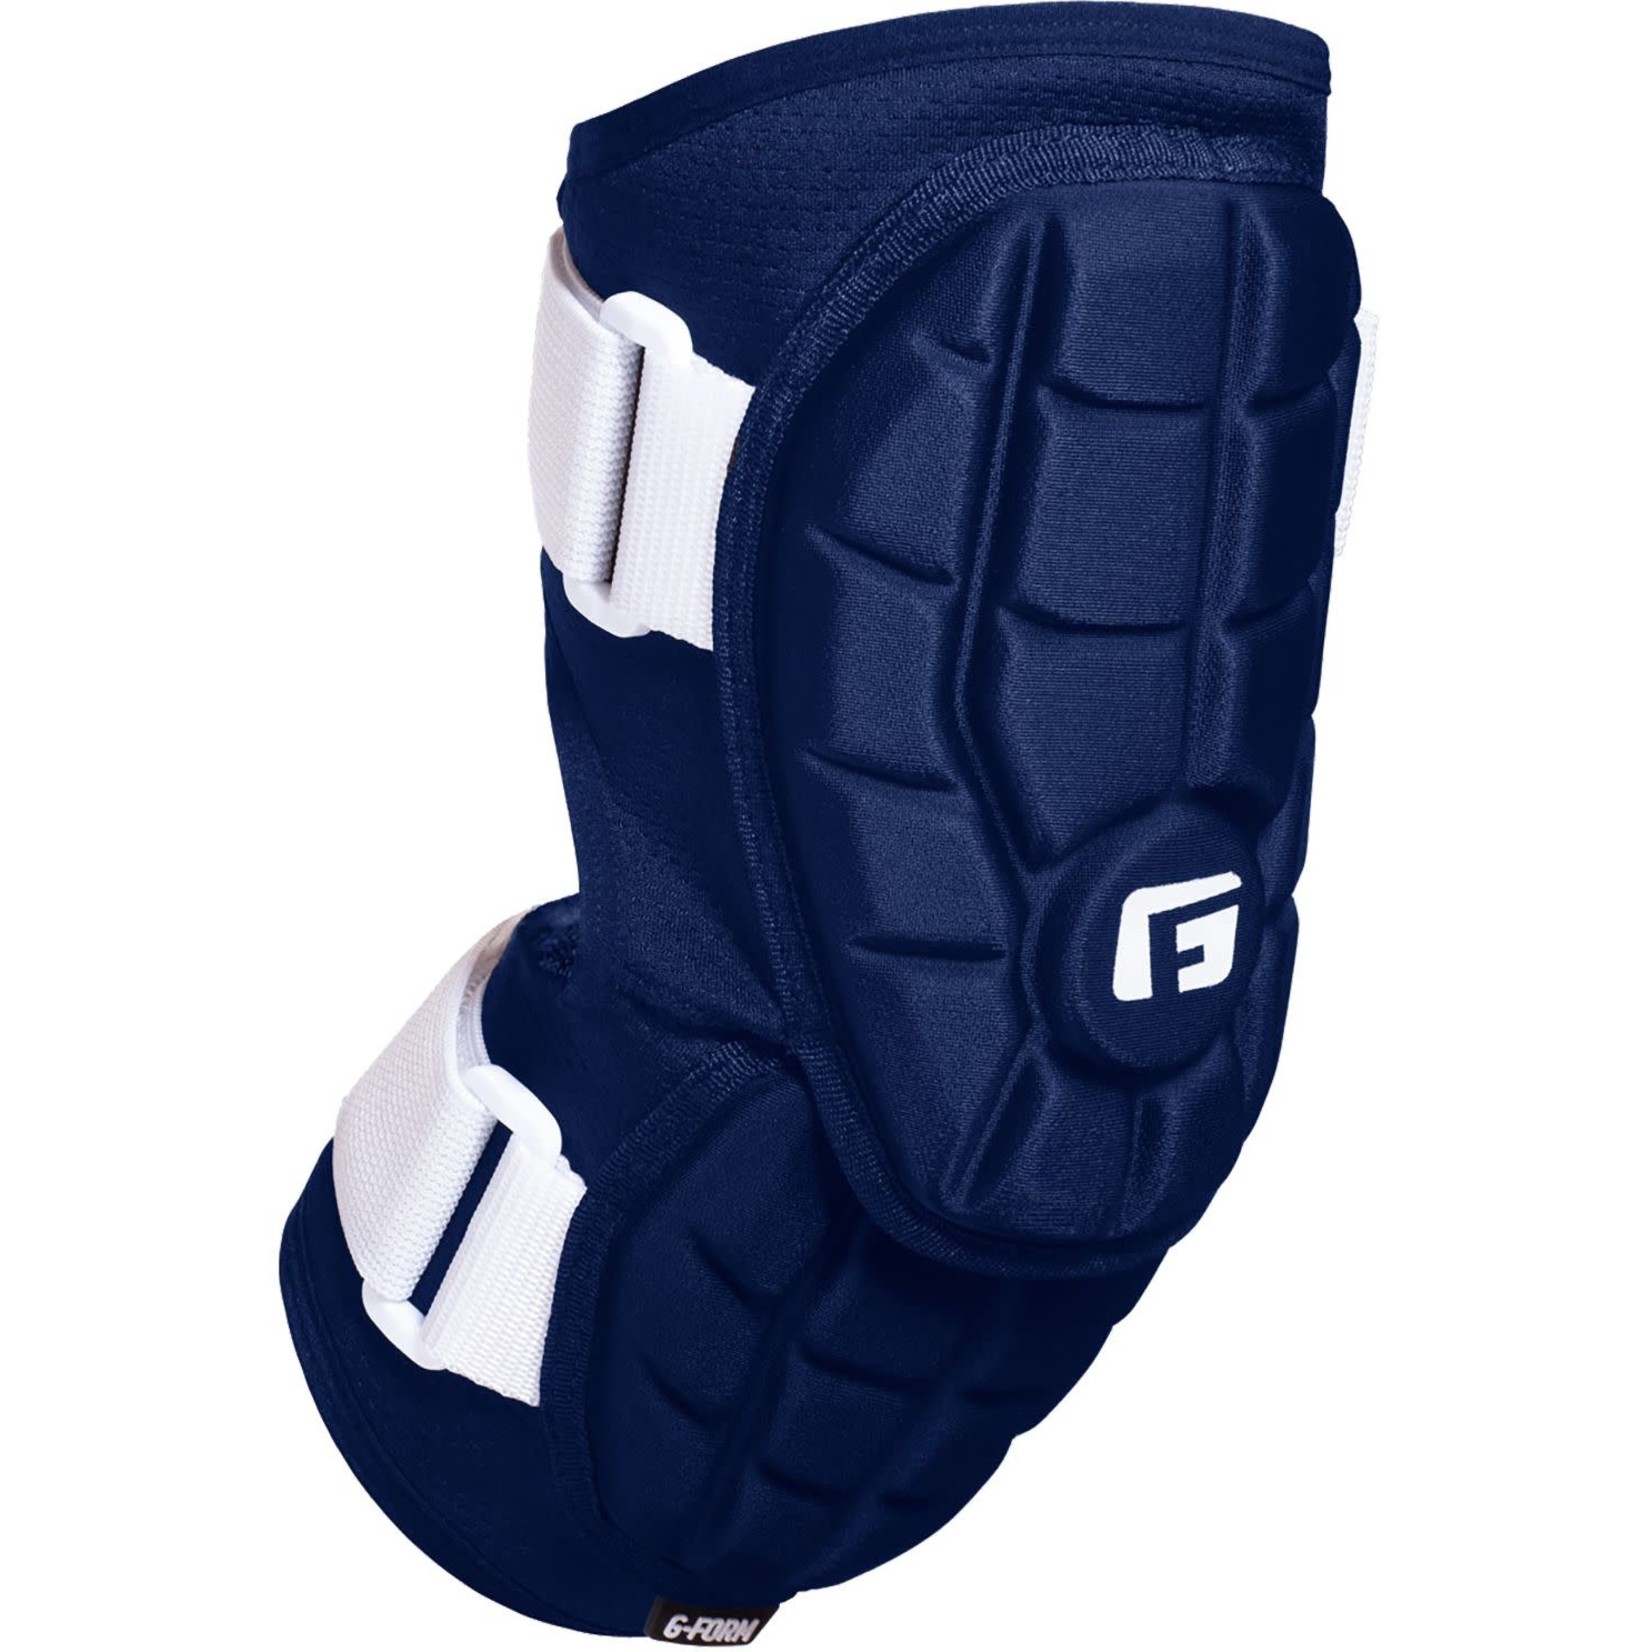 G-Form G-Form Elite 2 Youth Baseball Elbow Guards